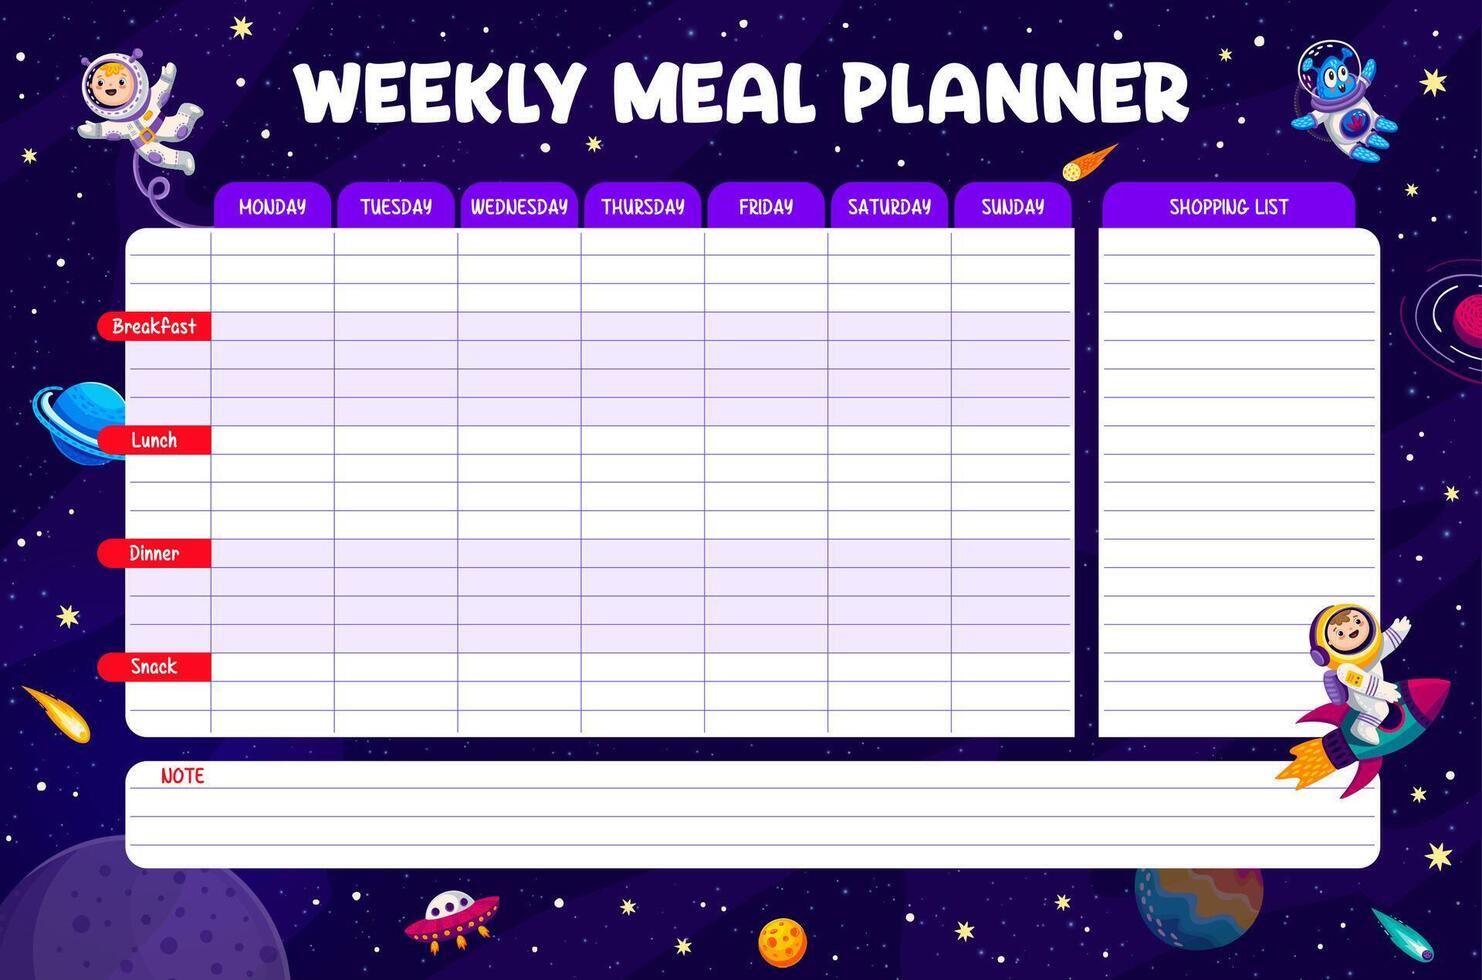 Weekly meal planner with space astronaut kid vector